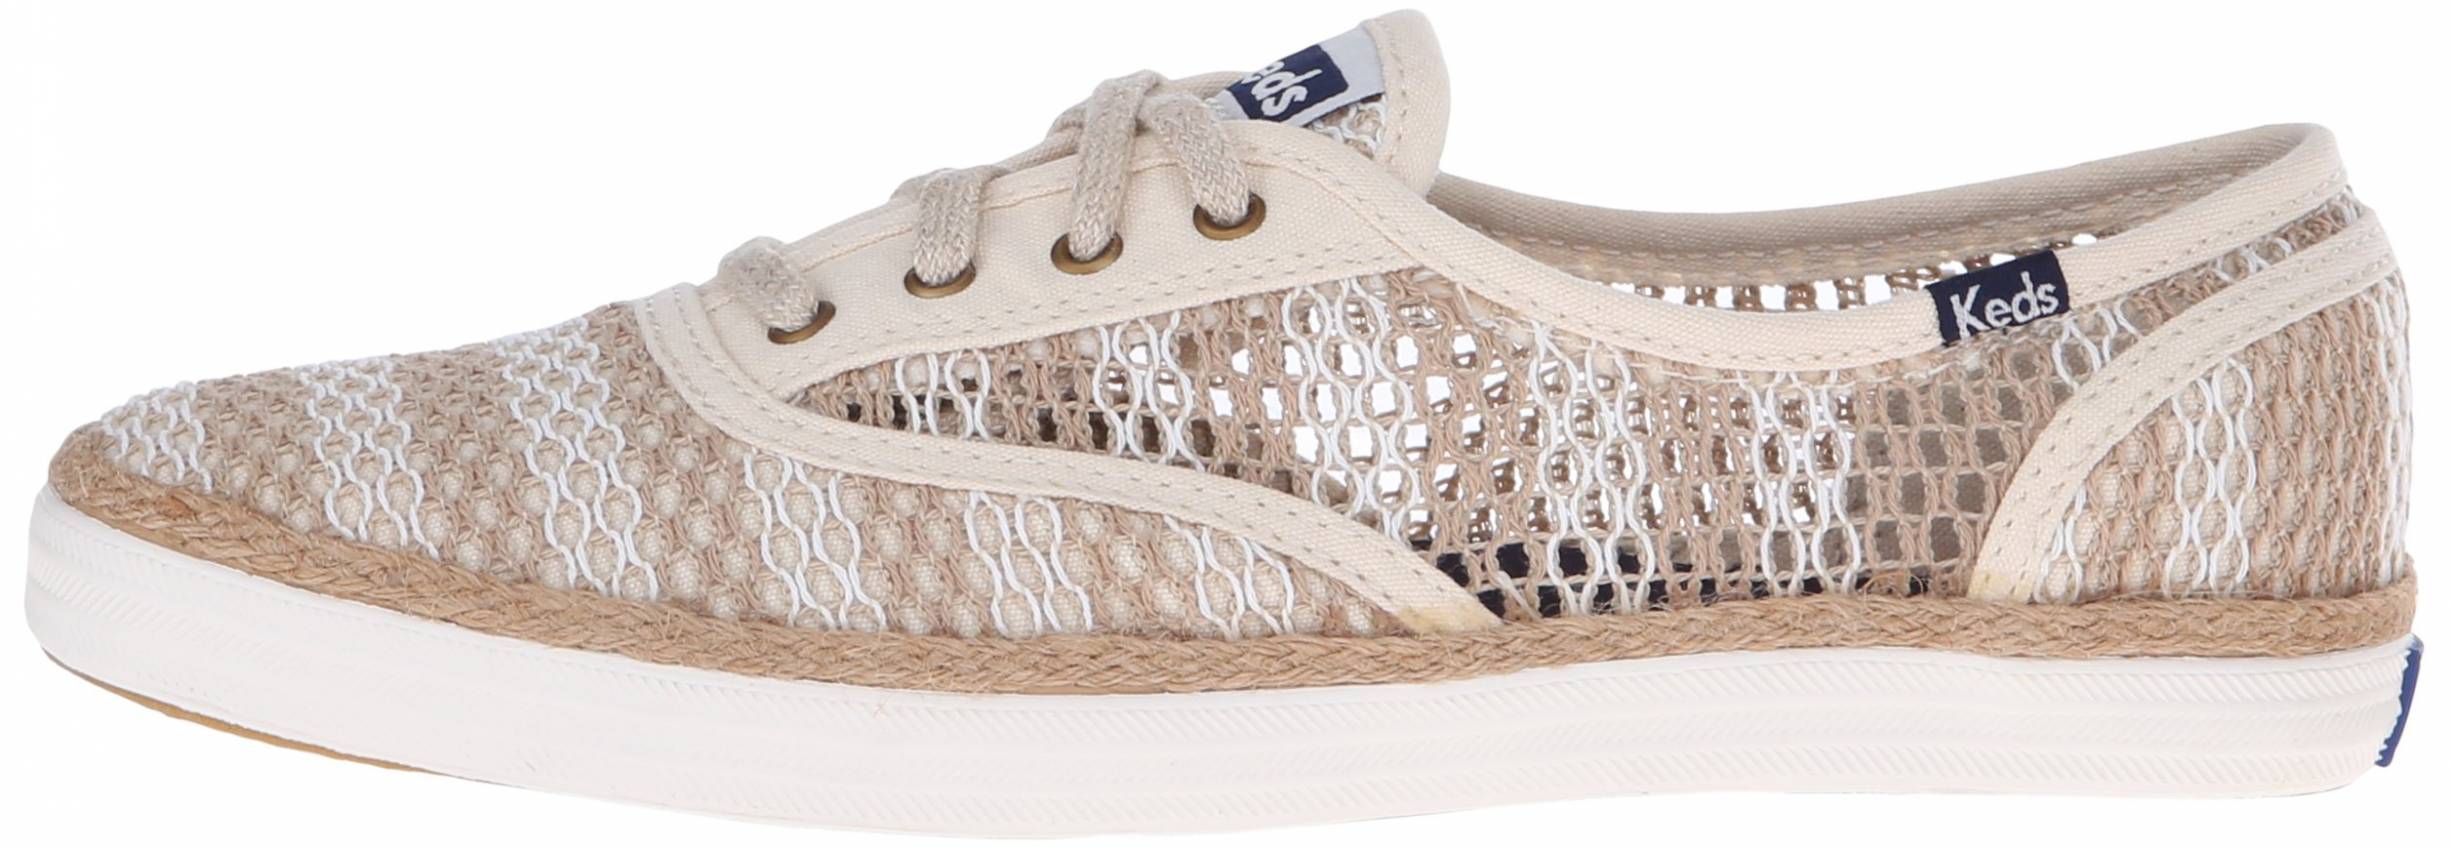 $70 + Review of Keds Champion Crochet 